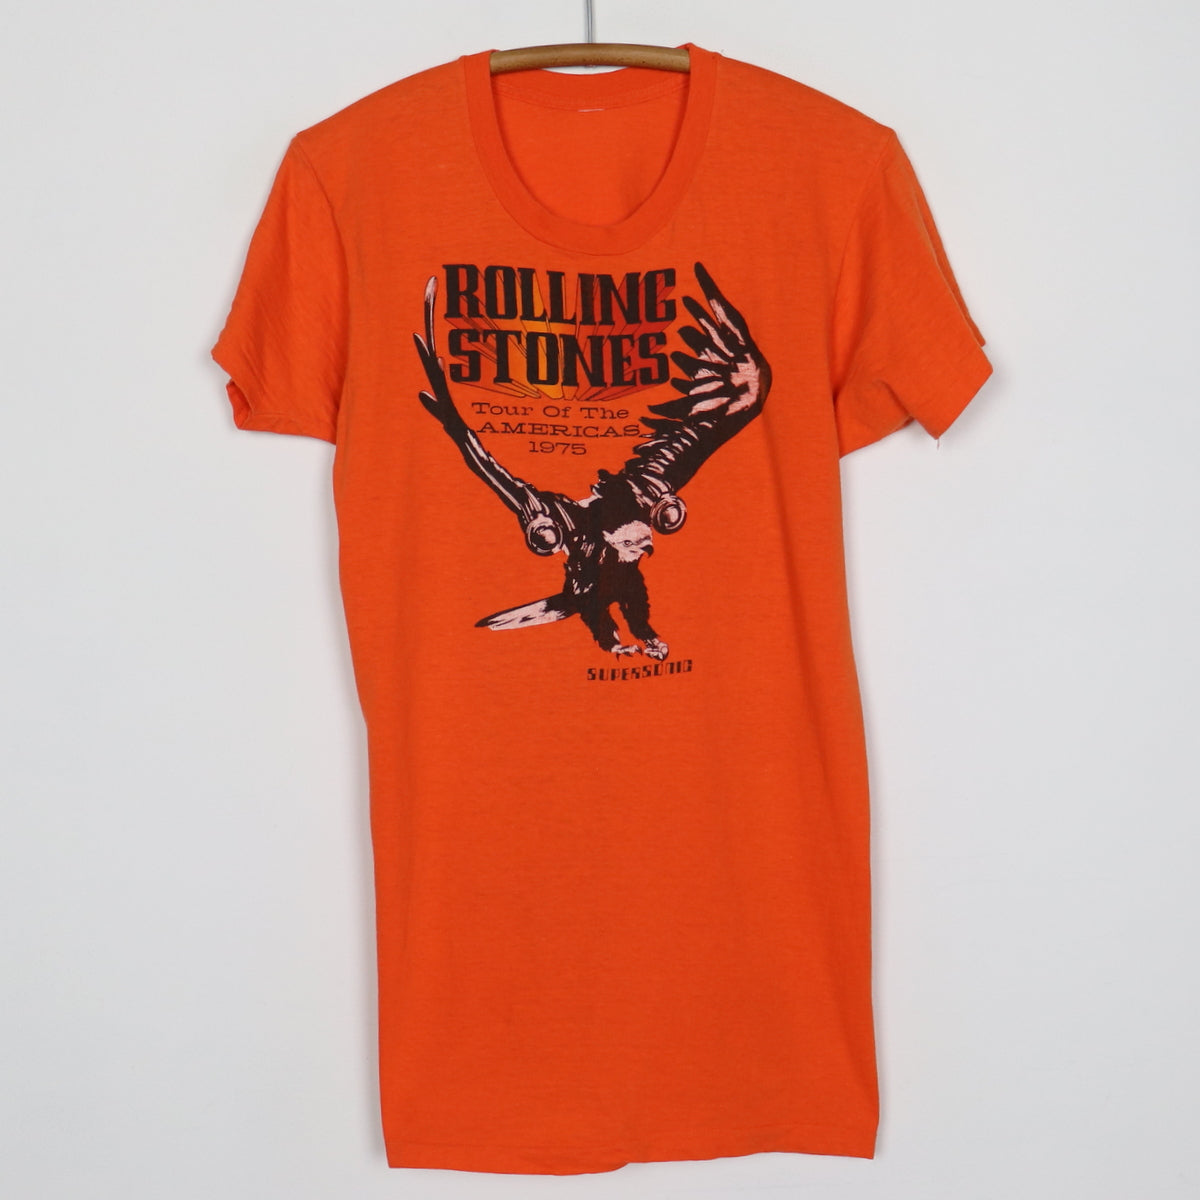 1975 Rolling Stones Tour Of The Americas Shirt